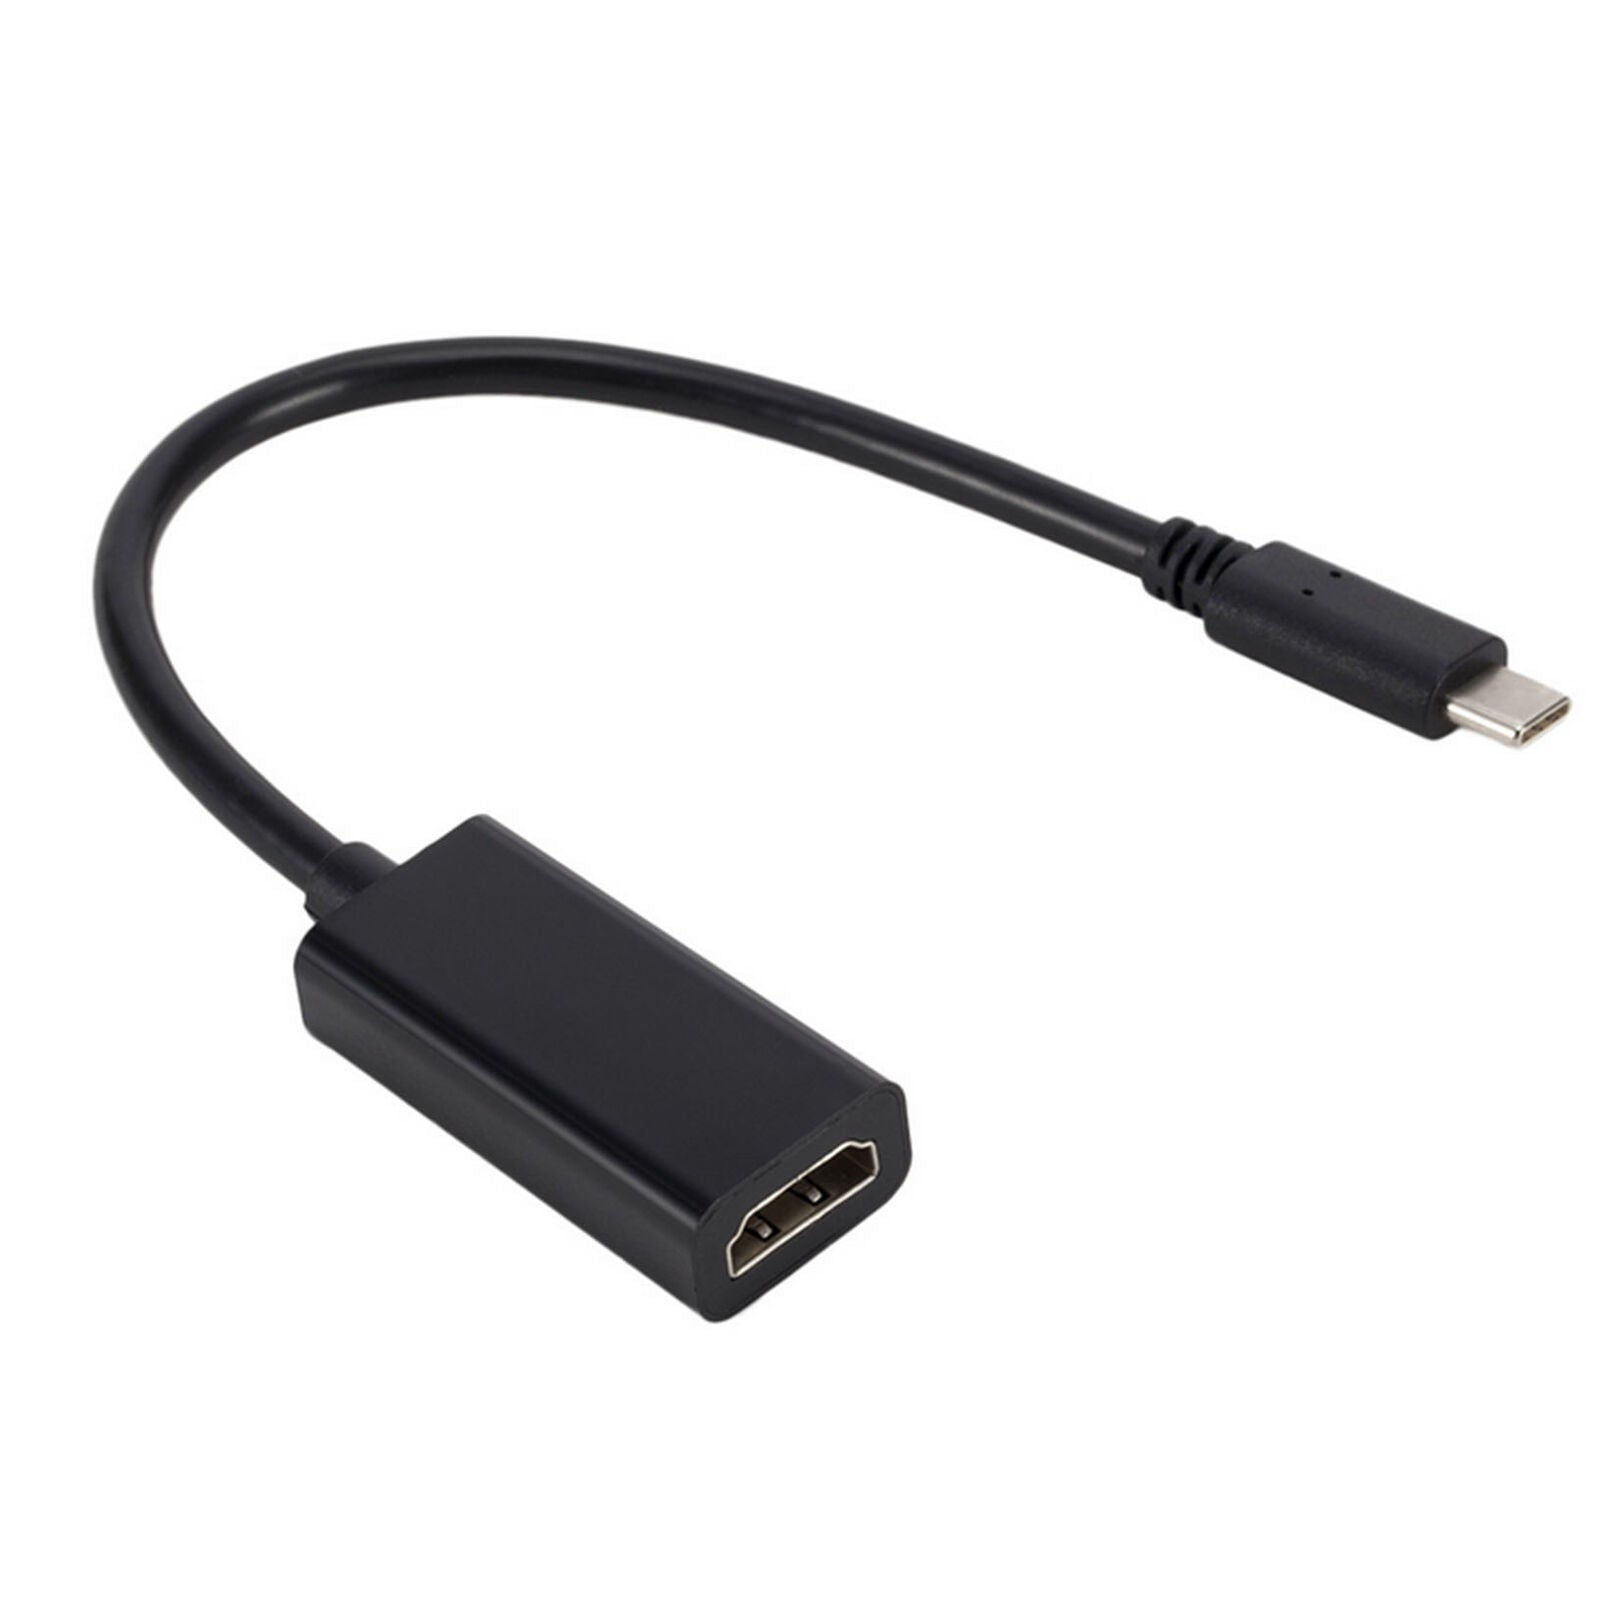 USB C Type C to HDMI Adapter USB 3.1 to HDMI Cable 4K 16CM for MacBook Pro